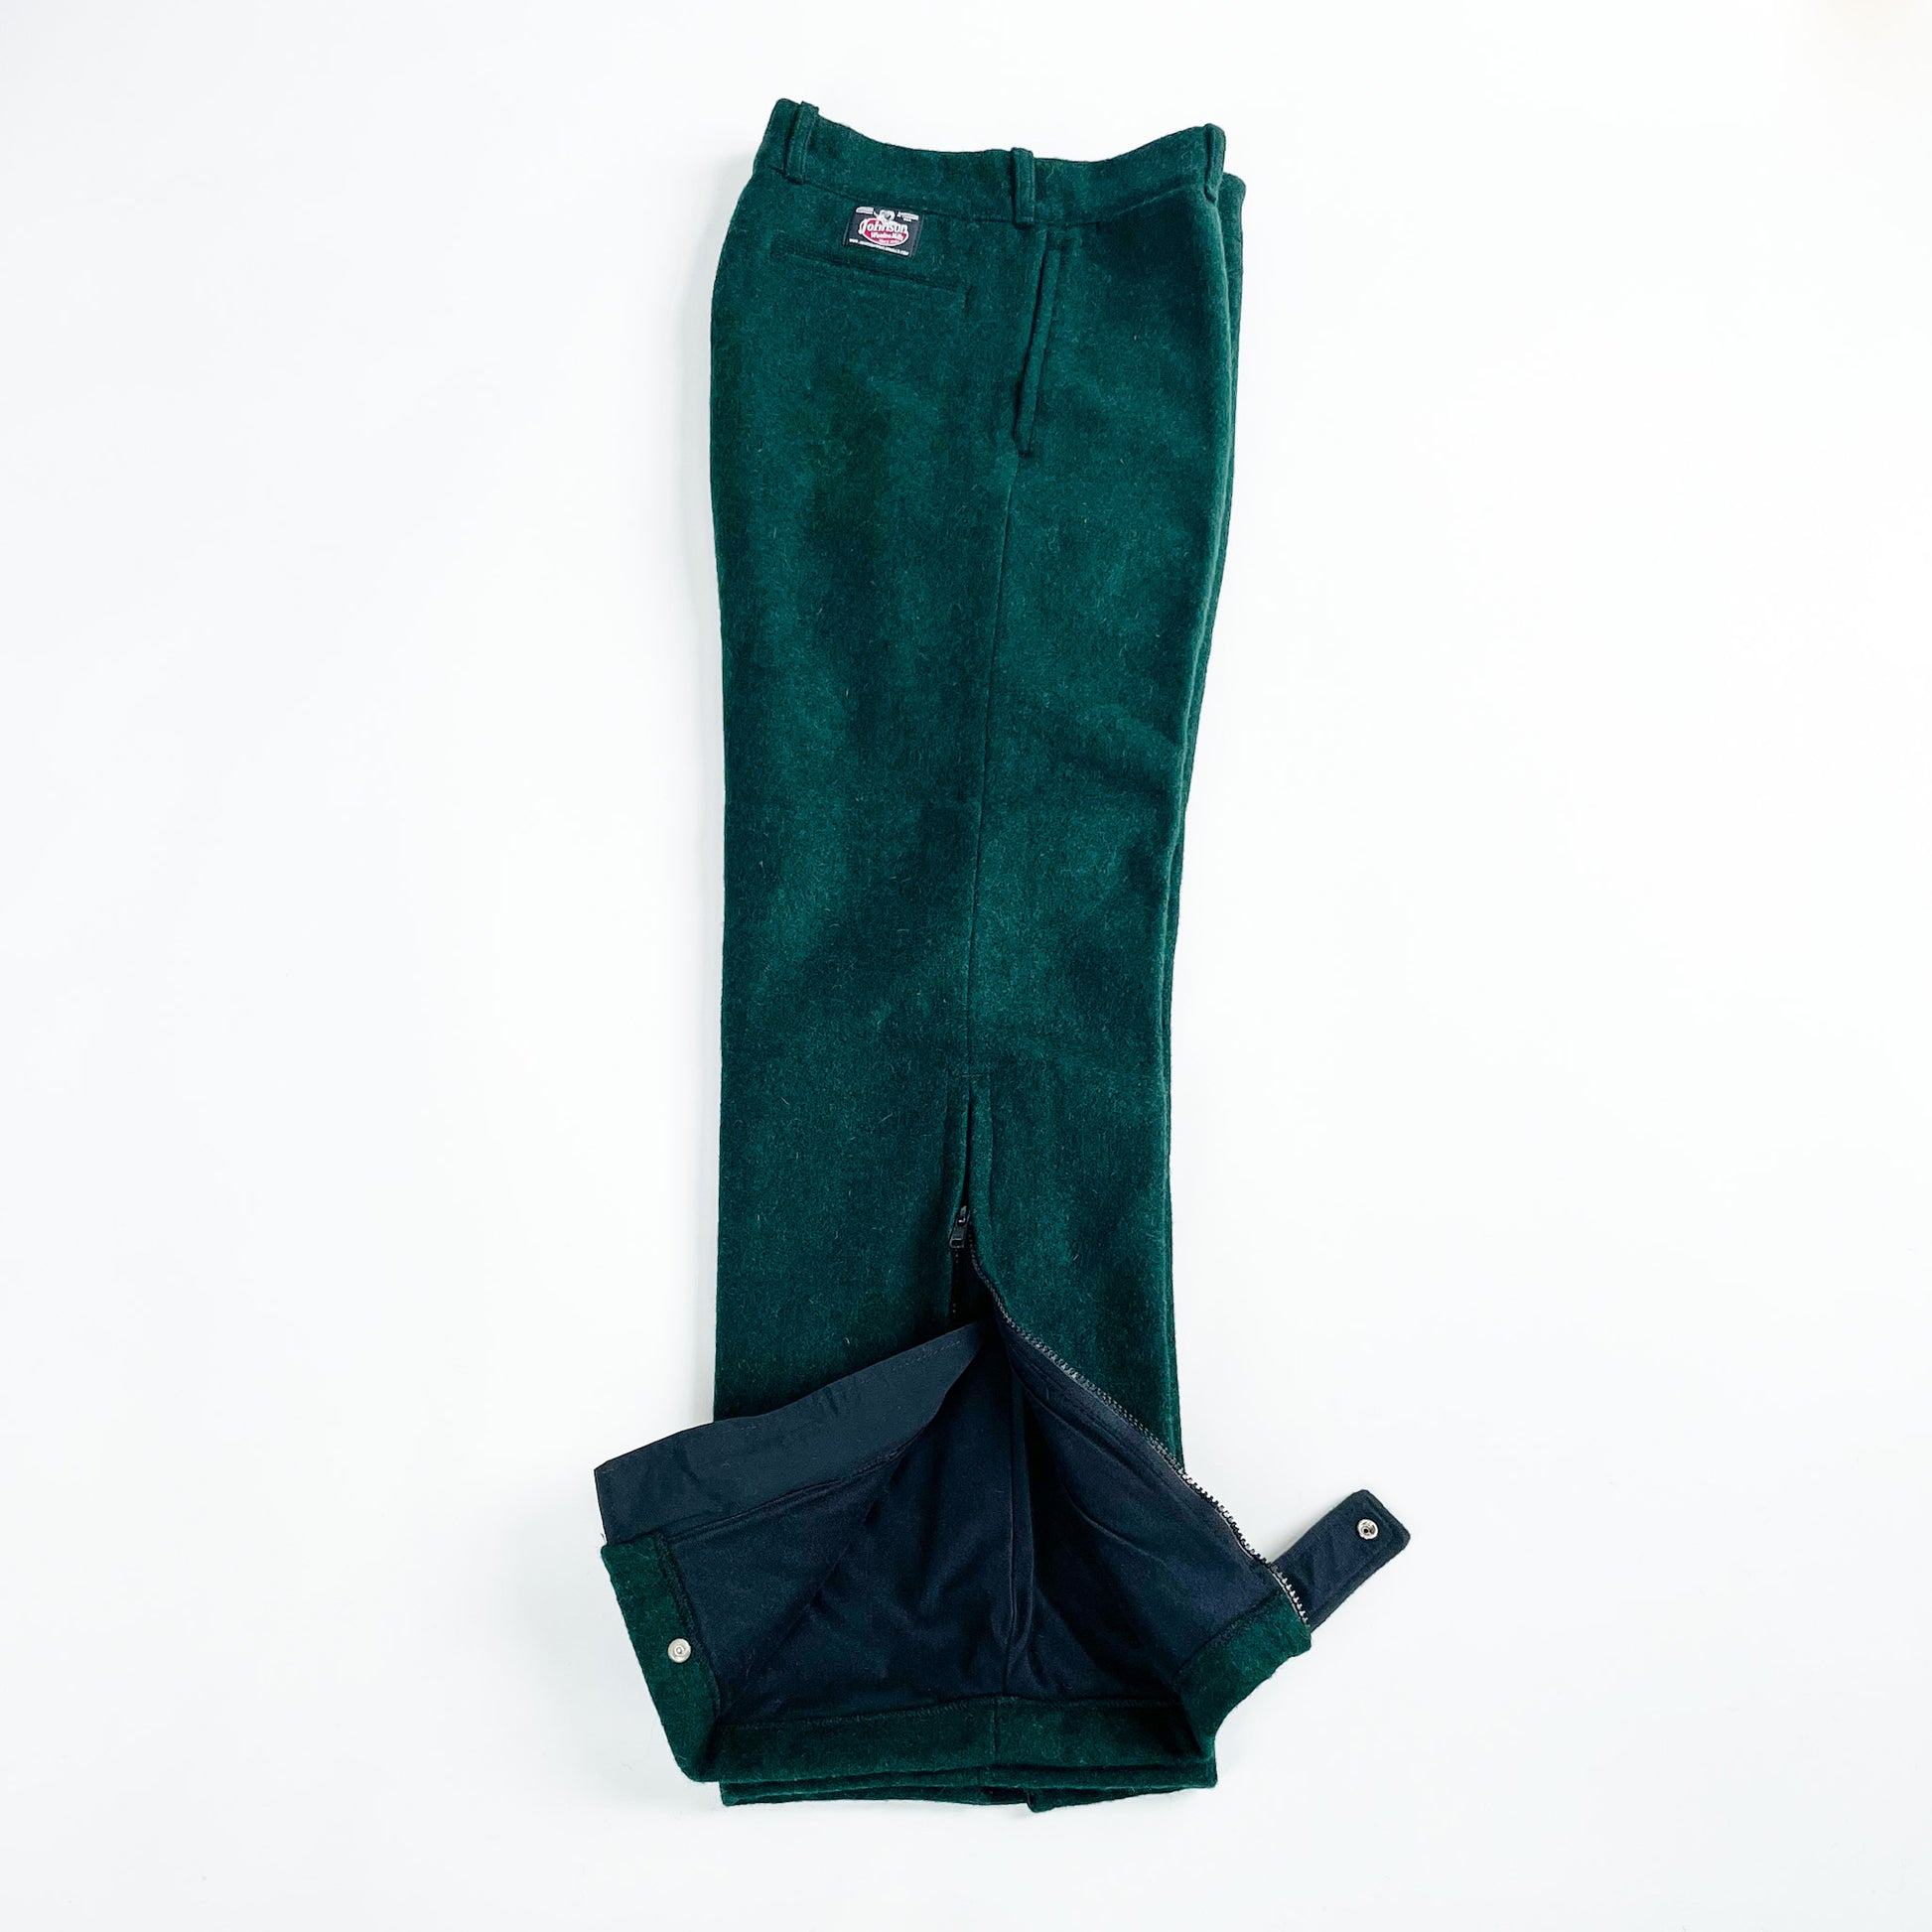 Zip Pants Spruce Green Microtherm Lined 15 inch side zipper on each leg side view with bottom opened